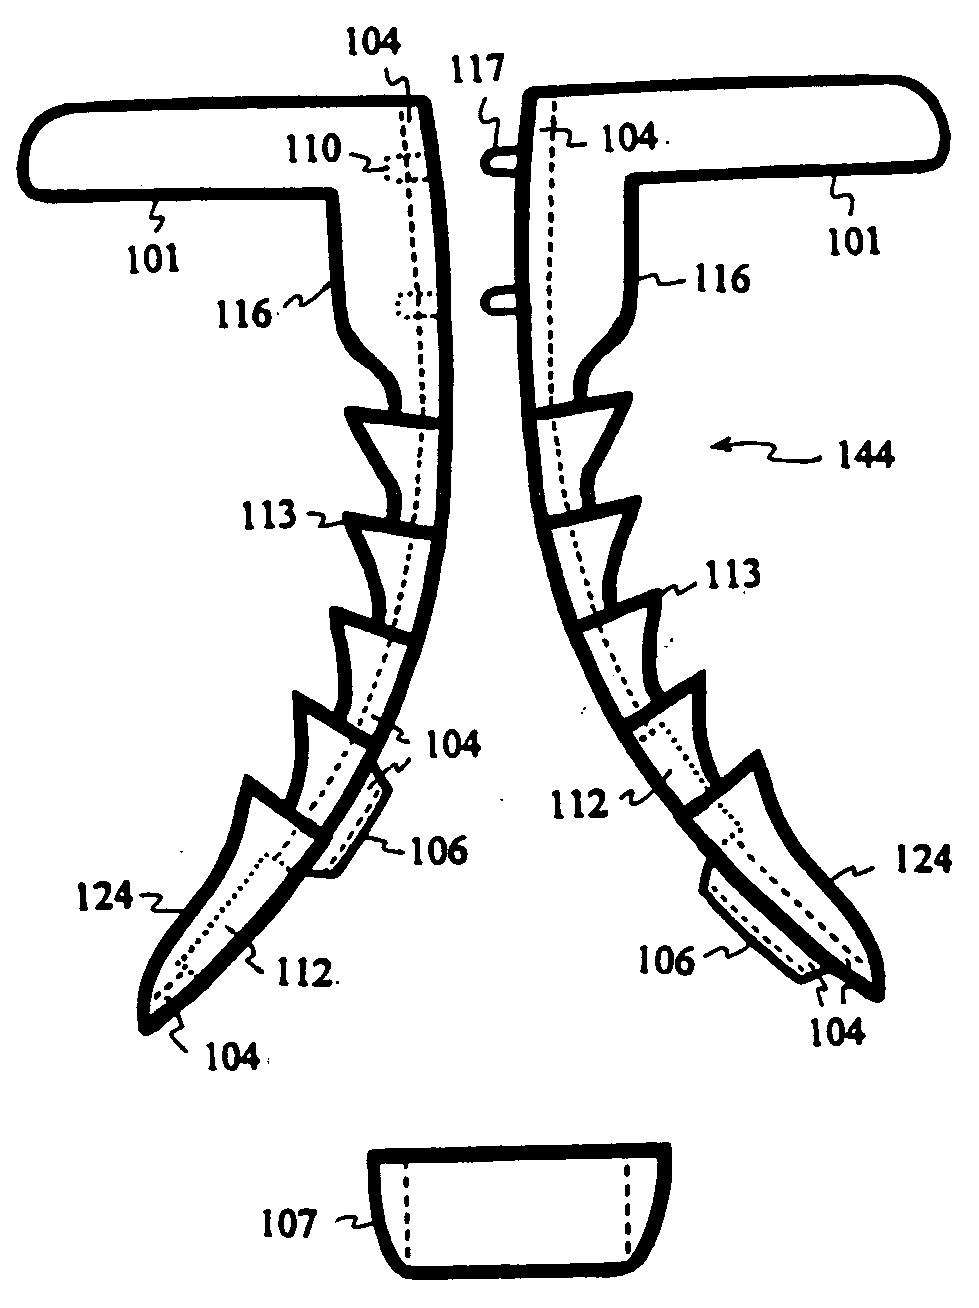 Expandable fastener with compressive grips